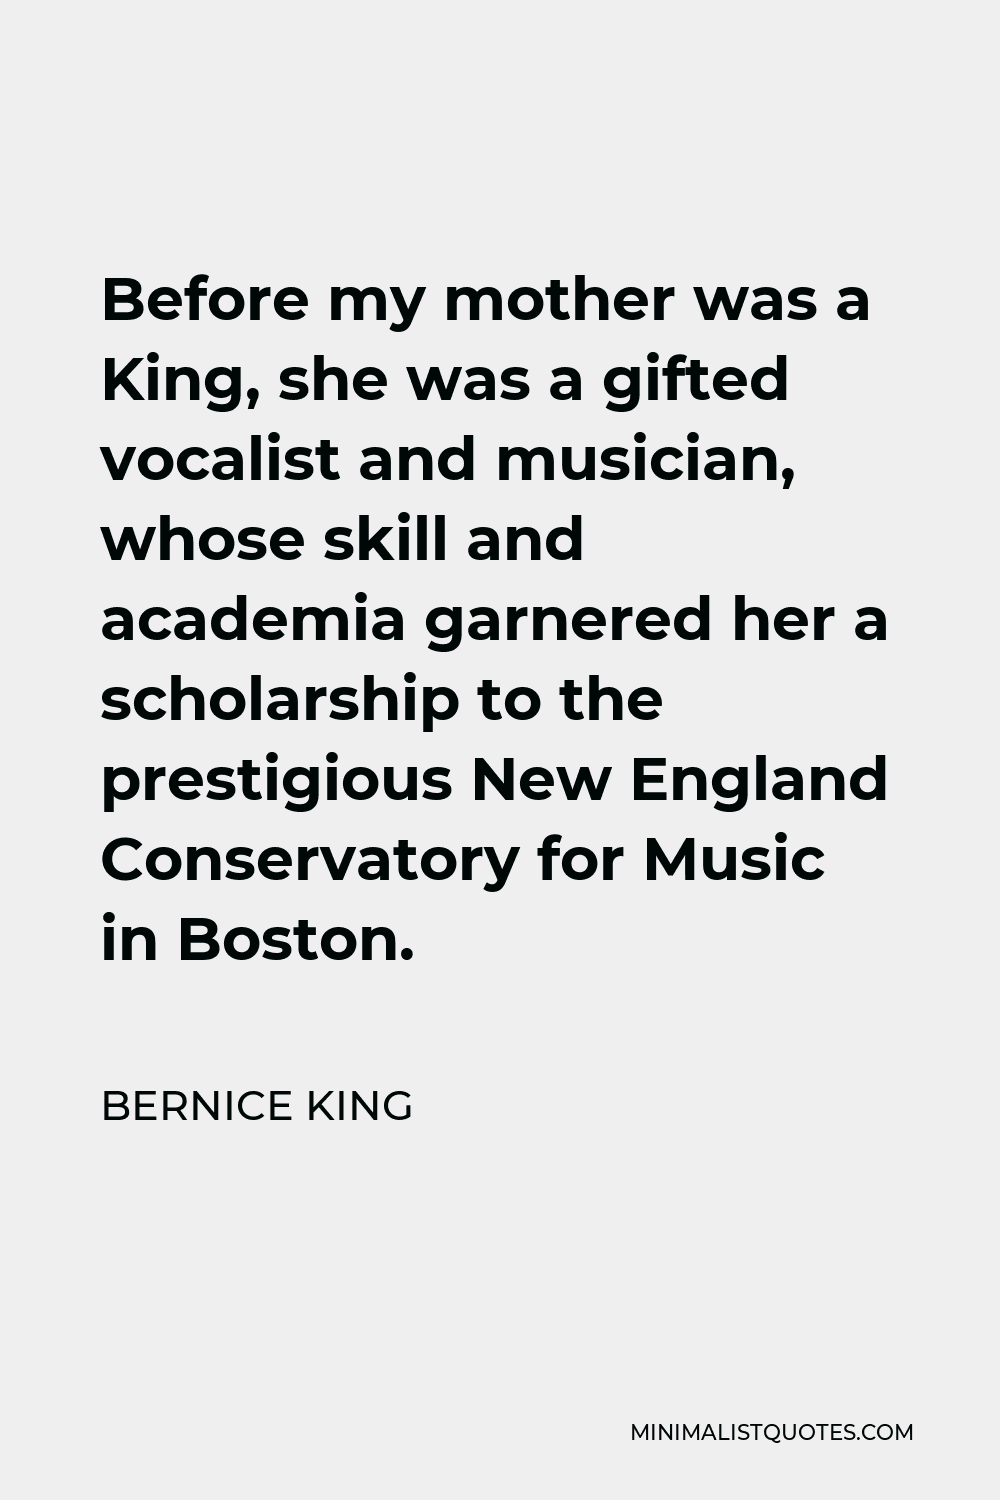 Bernice King Quote - Before my mother was a King, she was a gifted vocalist and musician, whose skill and academia garnered her a scholarship to the prestigious New England Conservatory for Music in Boston.